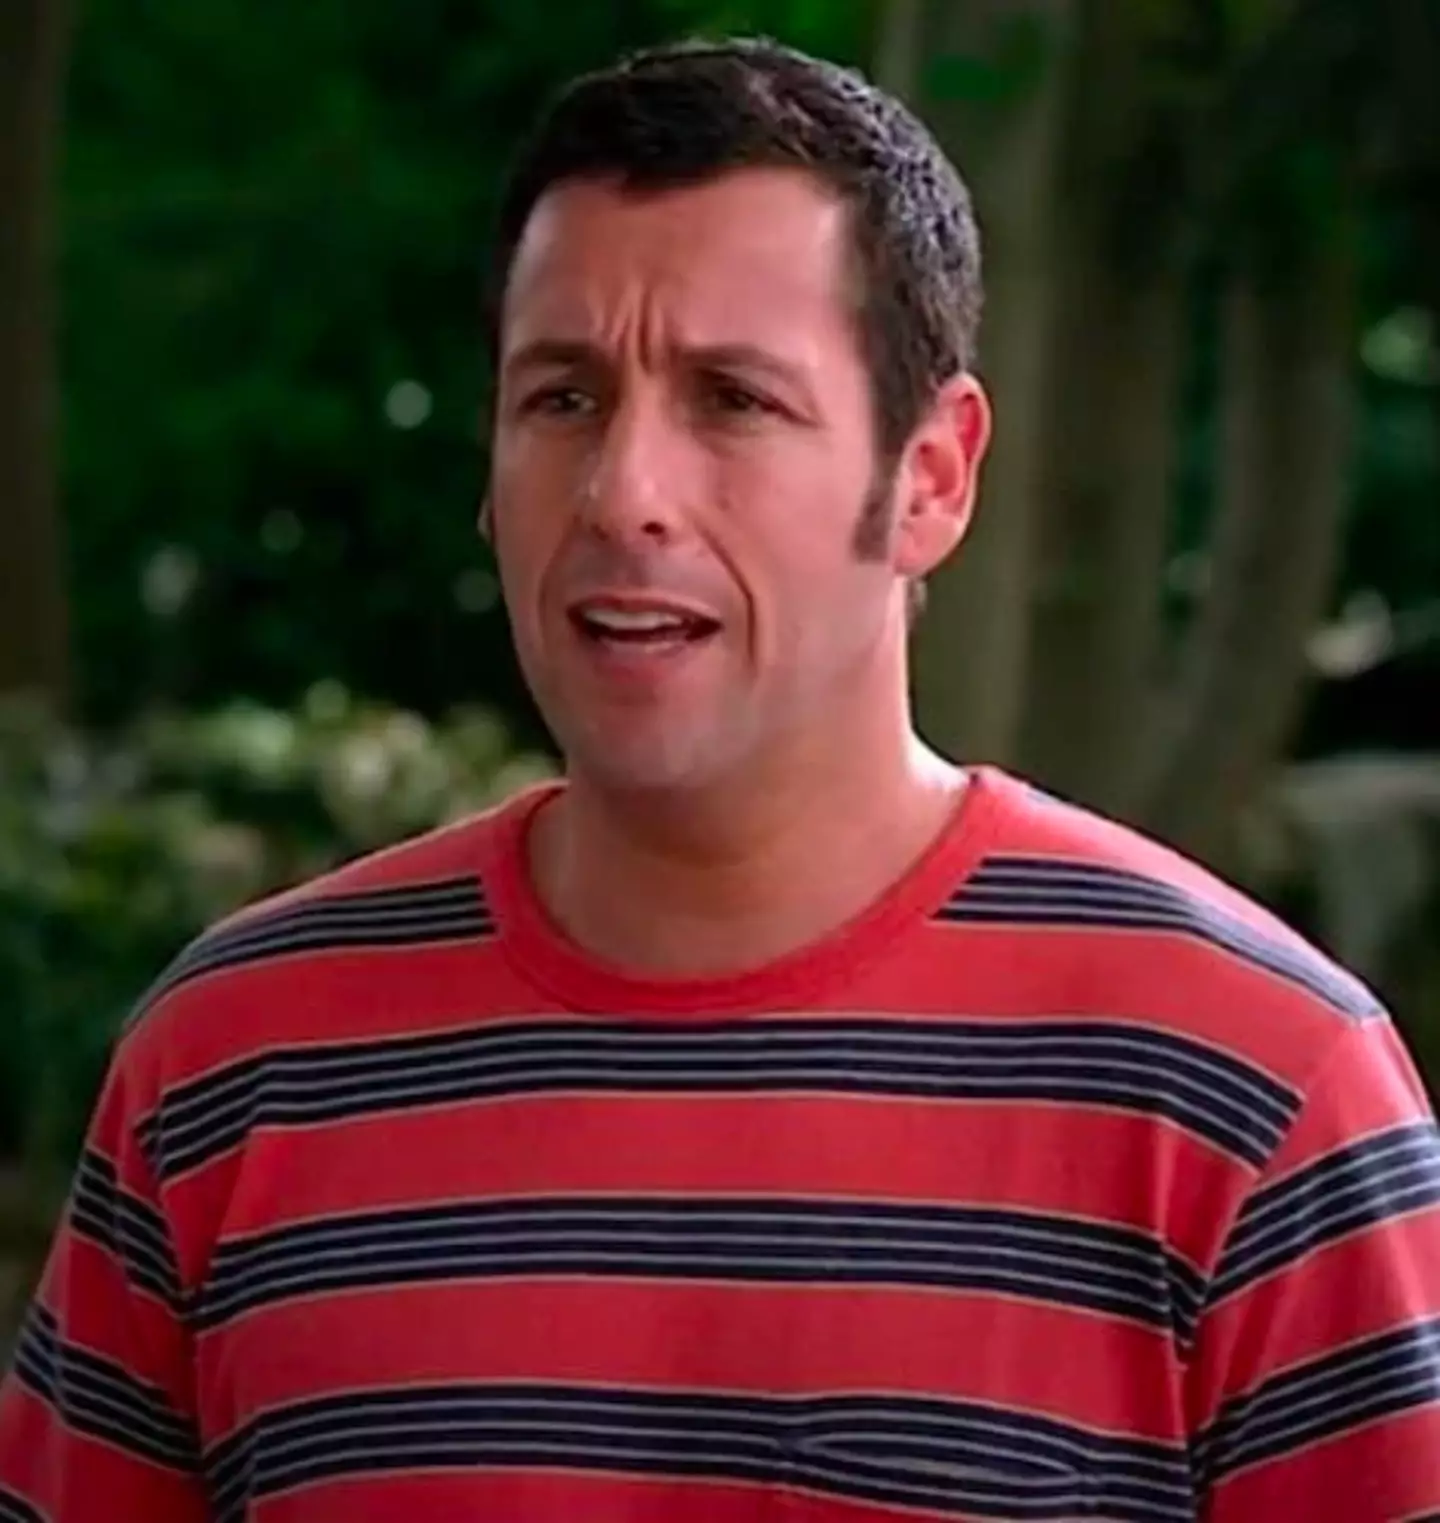 Adam Sandler has shared a heartbreaking tribute in memory of his Grown Ups co-star Alec Musser who has passed away at the age of 50.